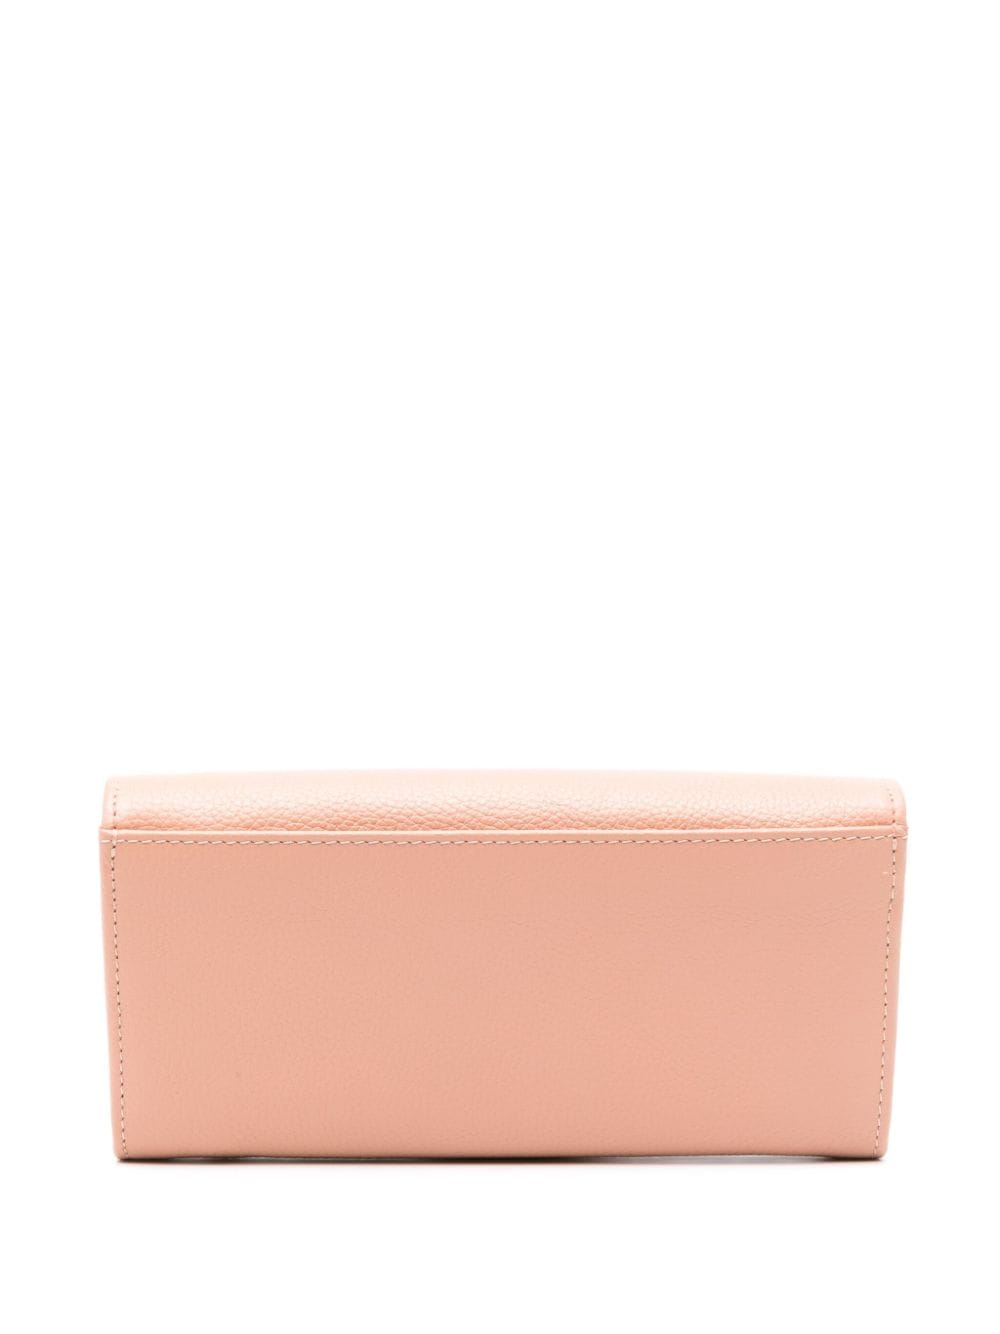 See by Chloé logo-engraved leather wallet - Roze